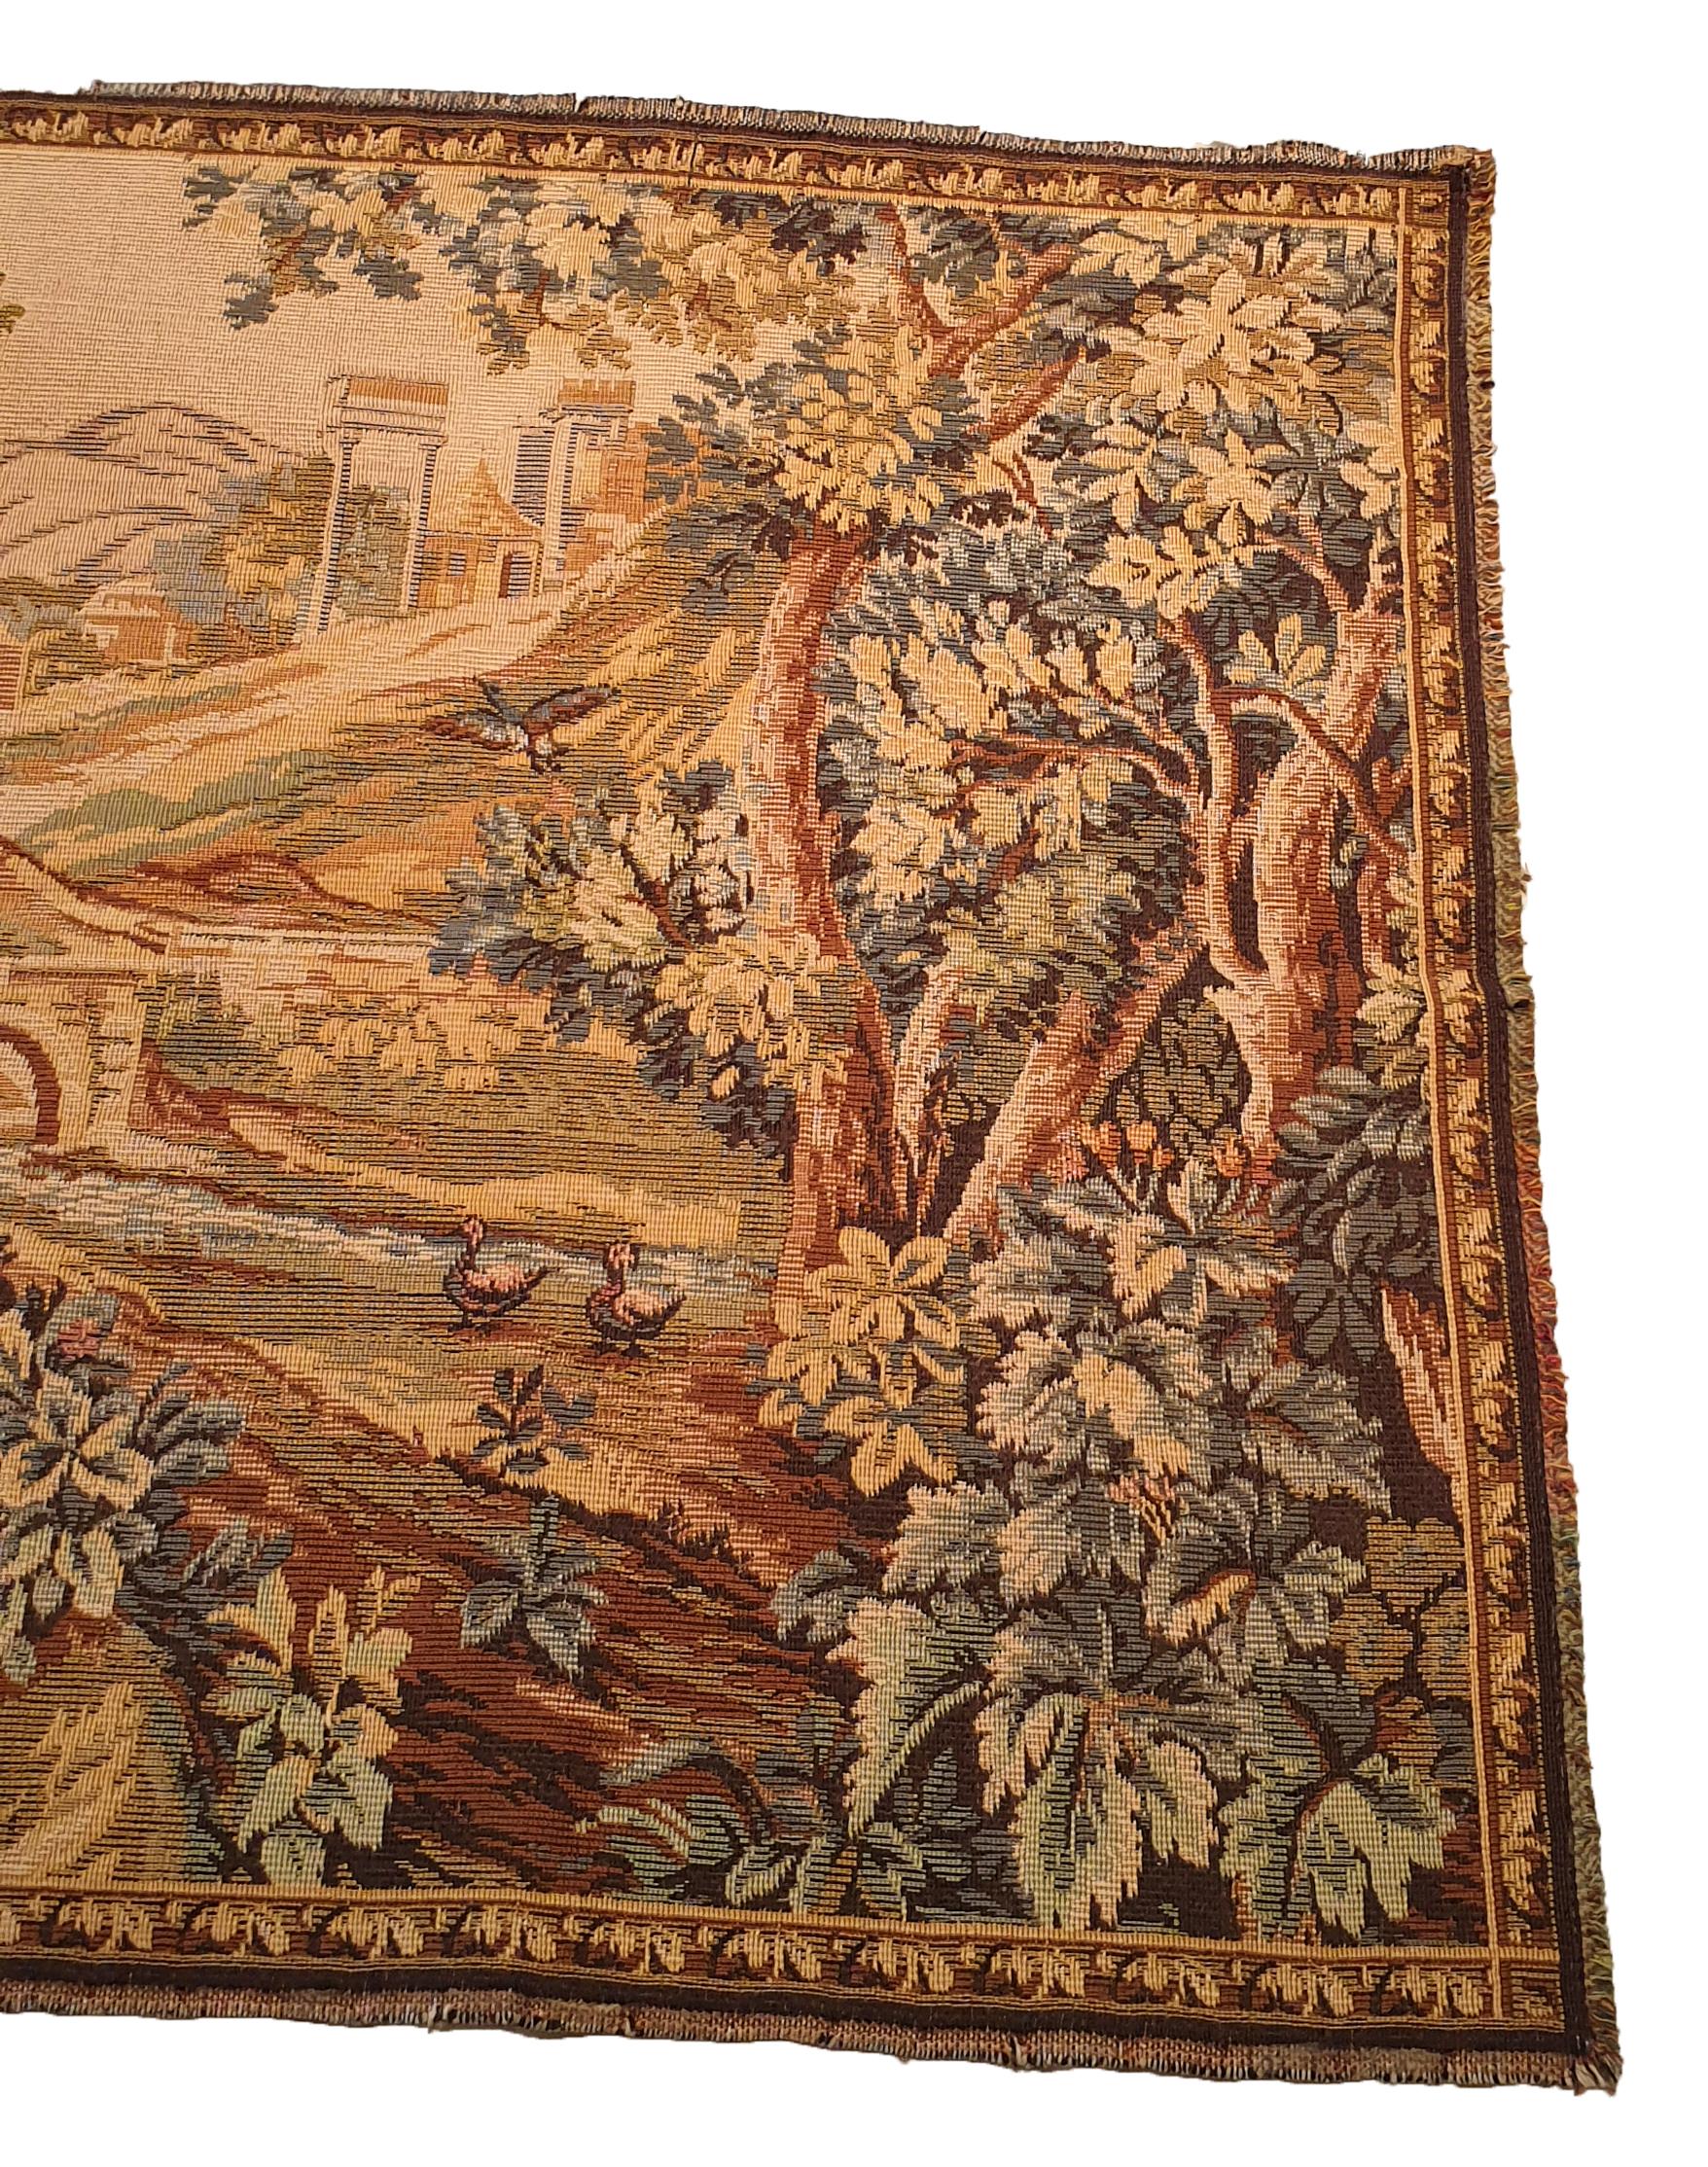 Tapestry of the 20th century in perfect condition of conservation.

Negotiable price and free delivery.

Dimension: 150 x 80 cm.